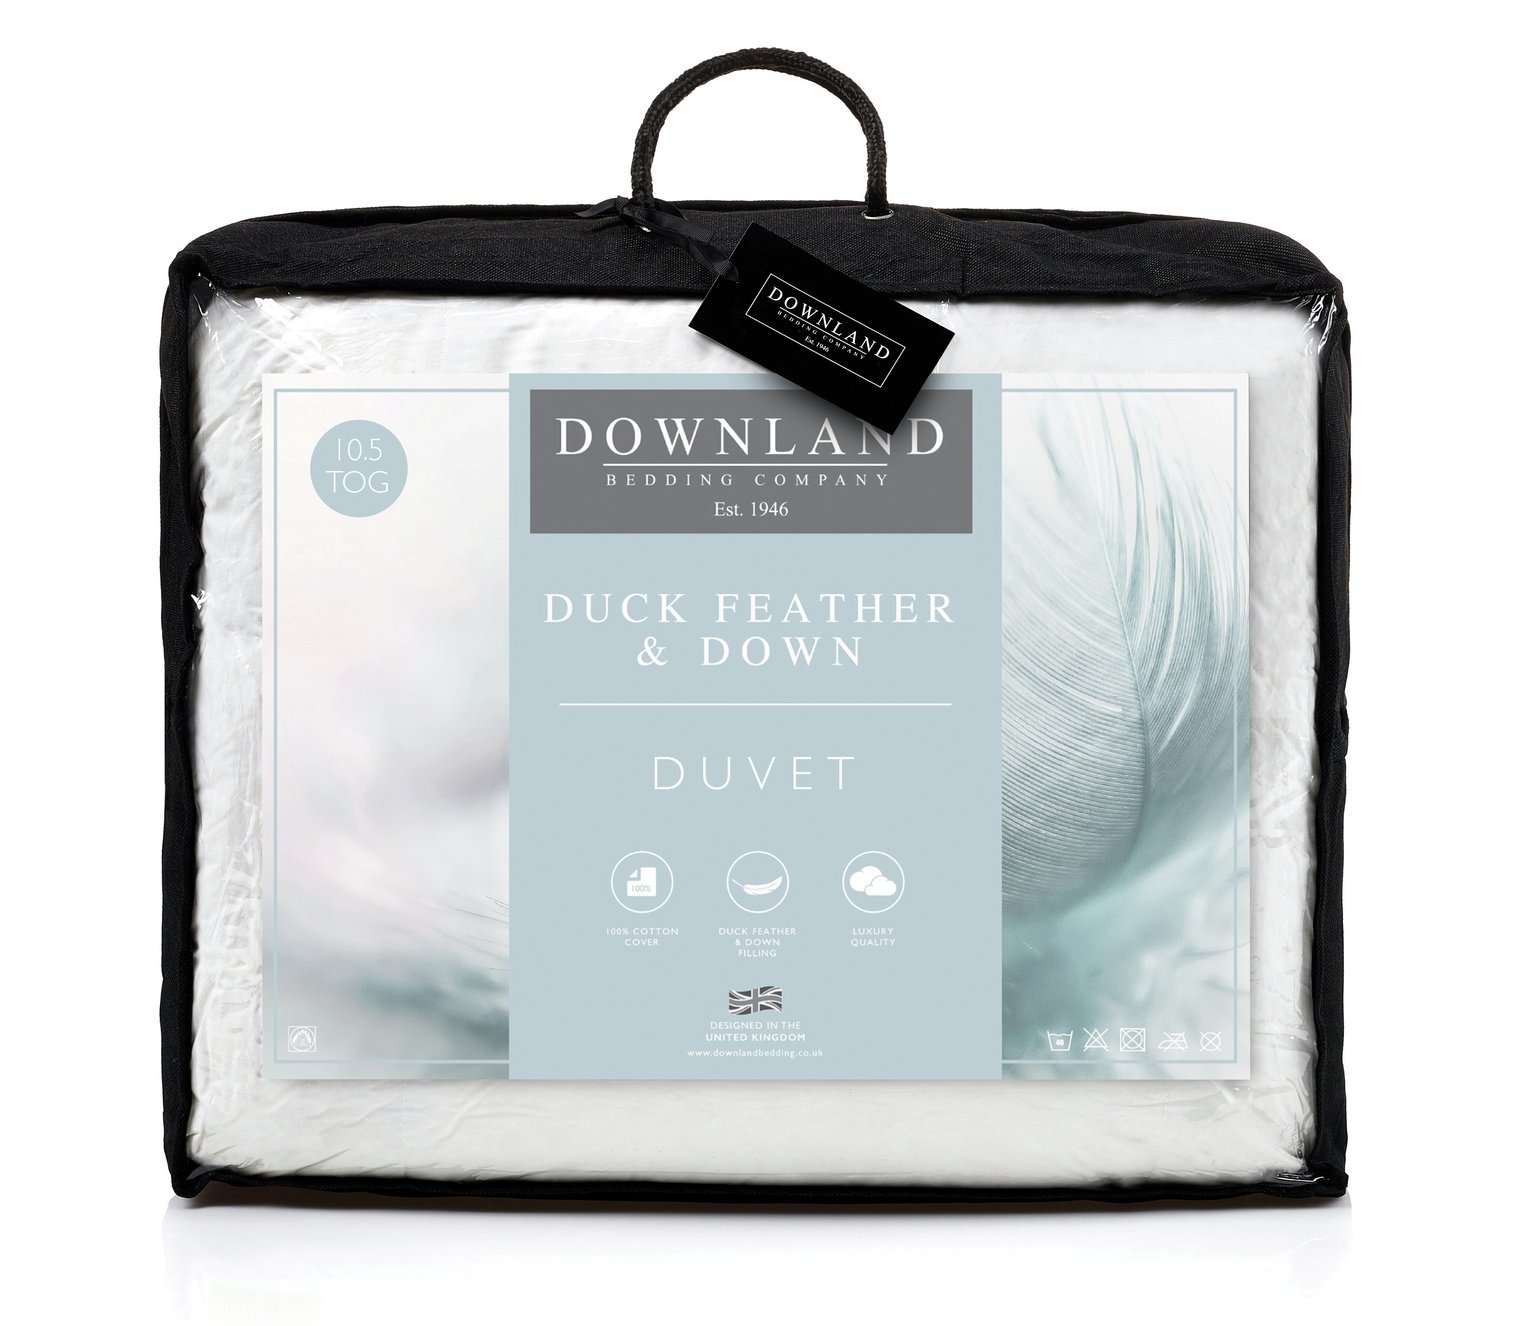 Downland 10.5 Tog Duck, Feather and Down Duvet - Double